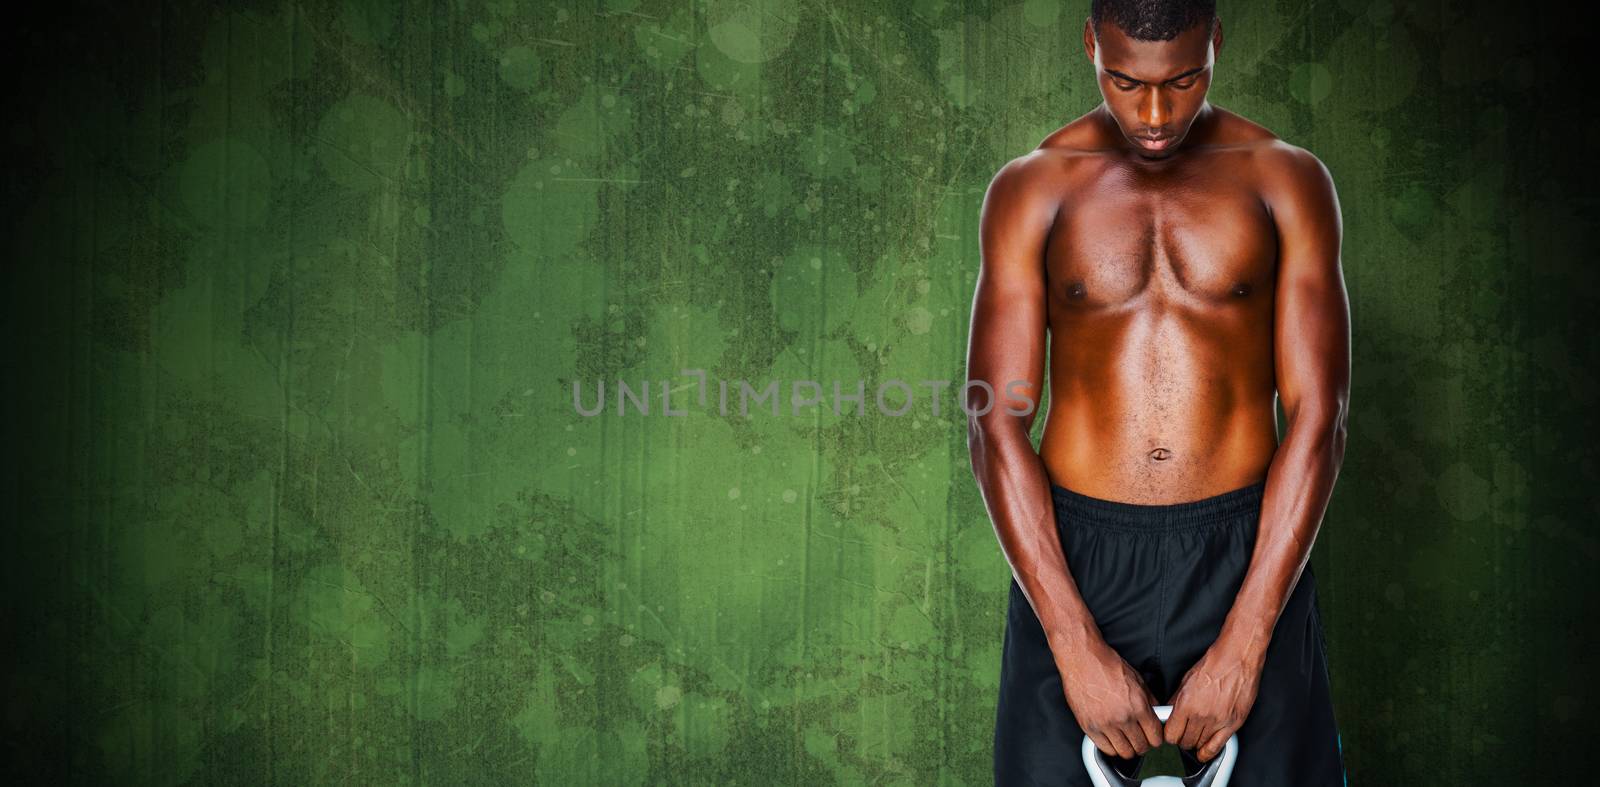 Shirtless fit young man lifting kettle bell against green paint splashed surface